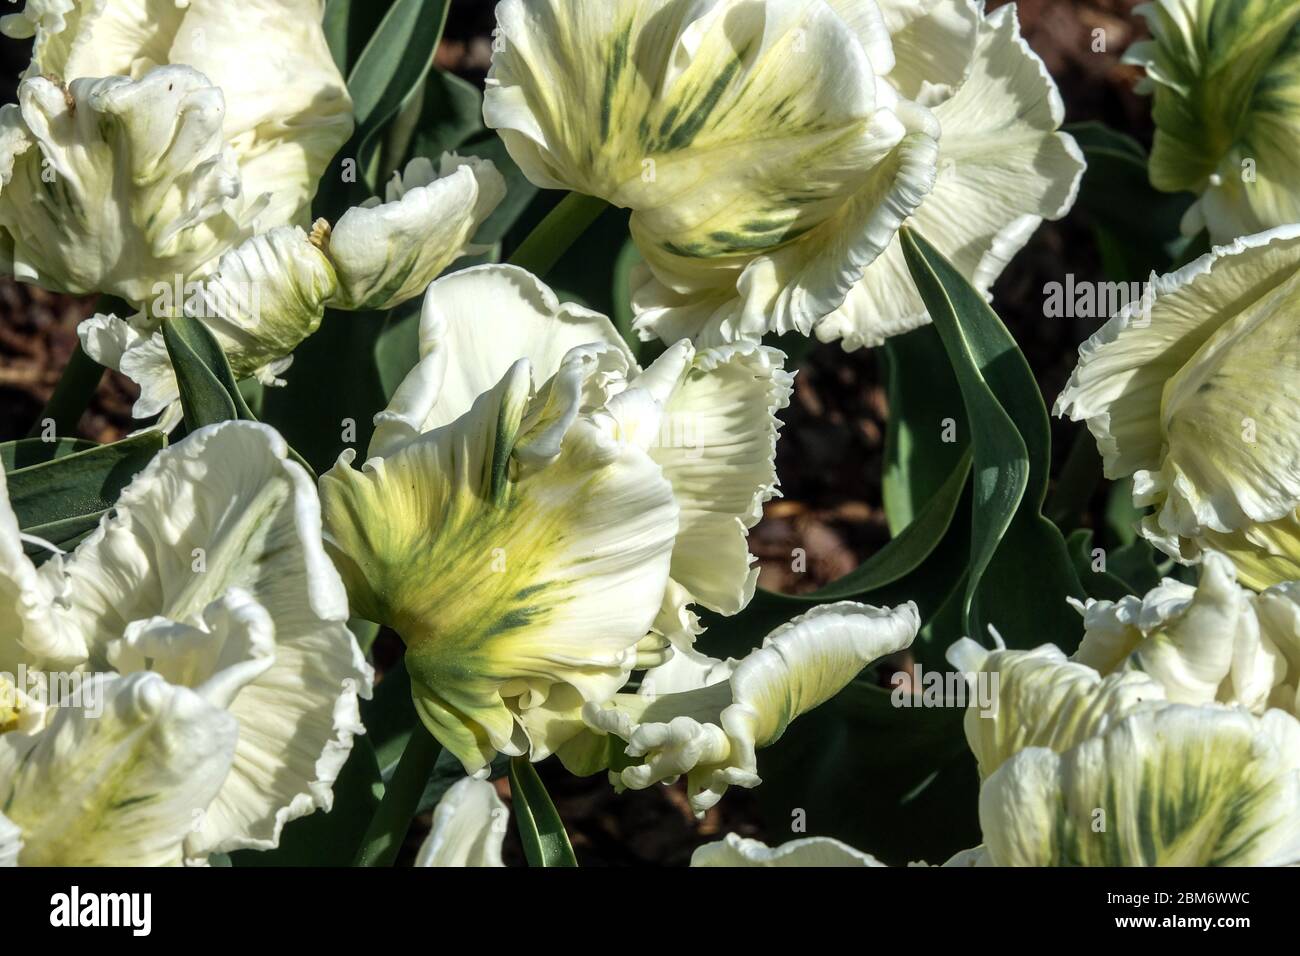 White tulips 'Super Parrot' tulip flowers Tulipa Flowers White Ruffled Twisted Petals Feathered Green White Parrots Tulips Flowering Flower bed White Stock Photo